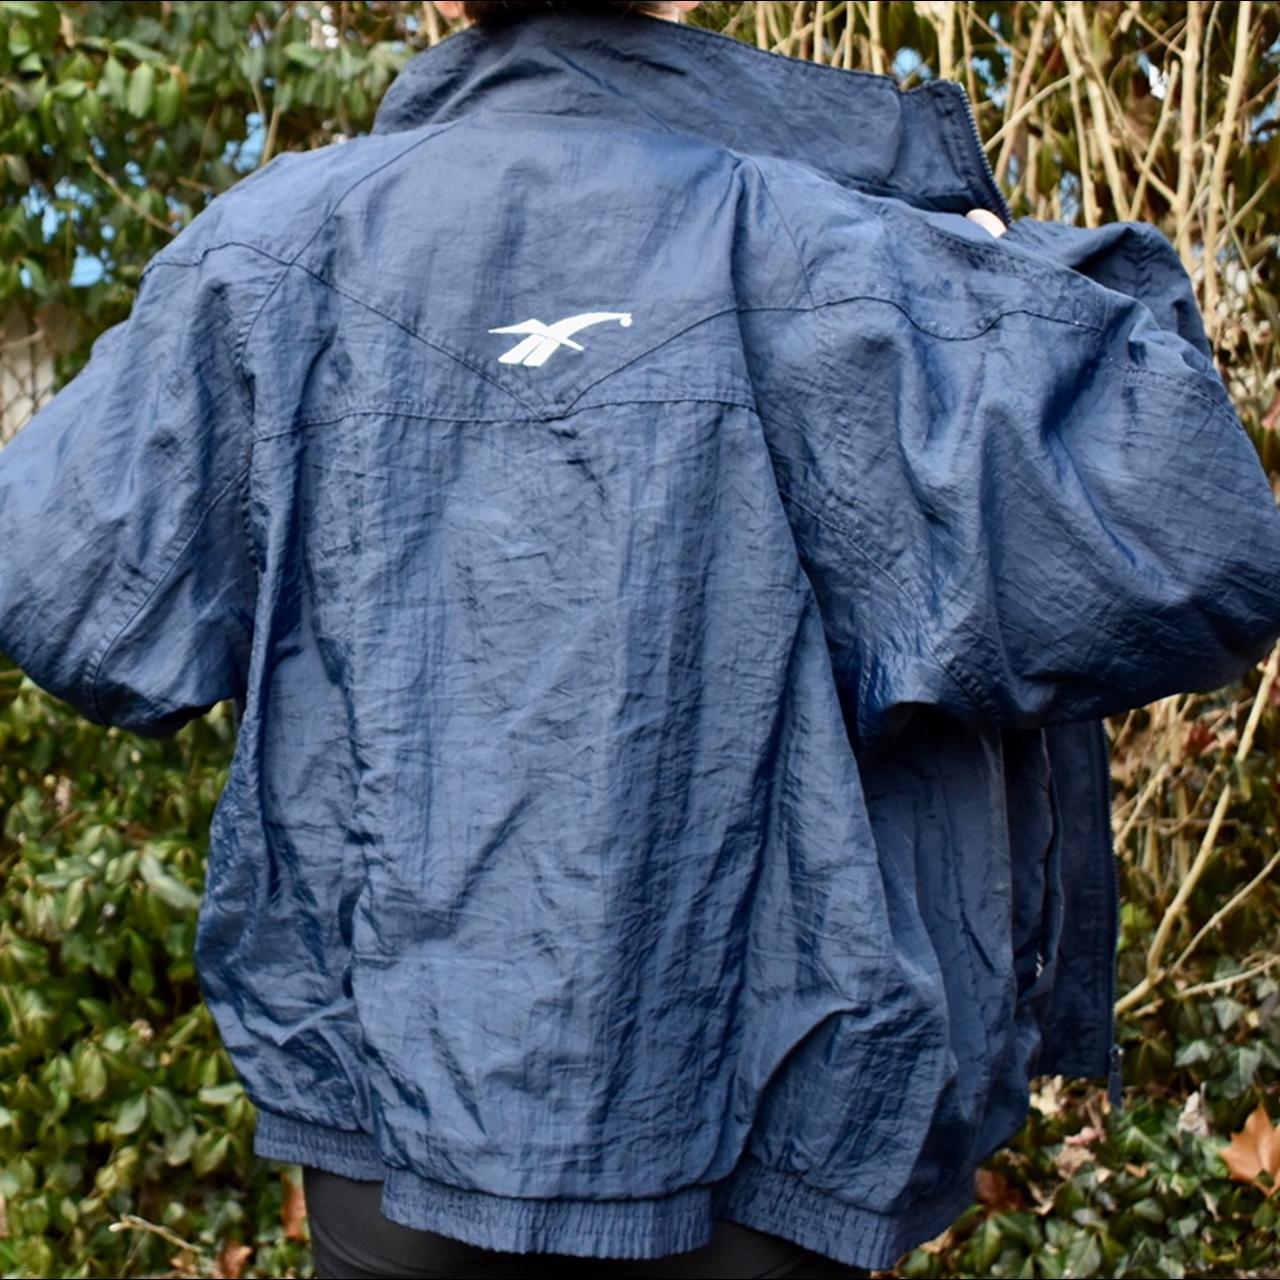 Product Image 2 - Vintage Reebok Windbreaker

Size: Large
Condition: Worn
Color: